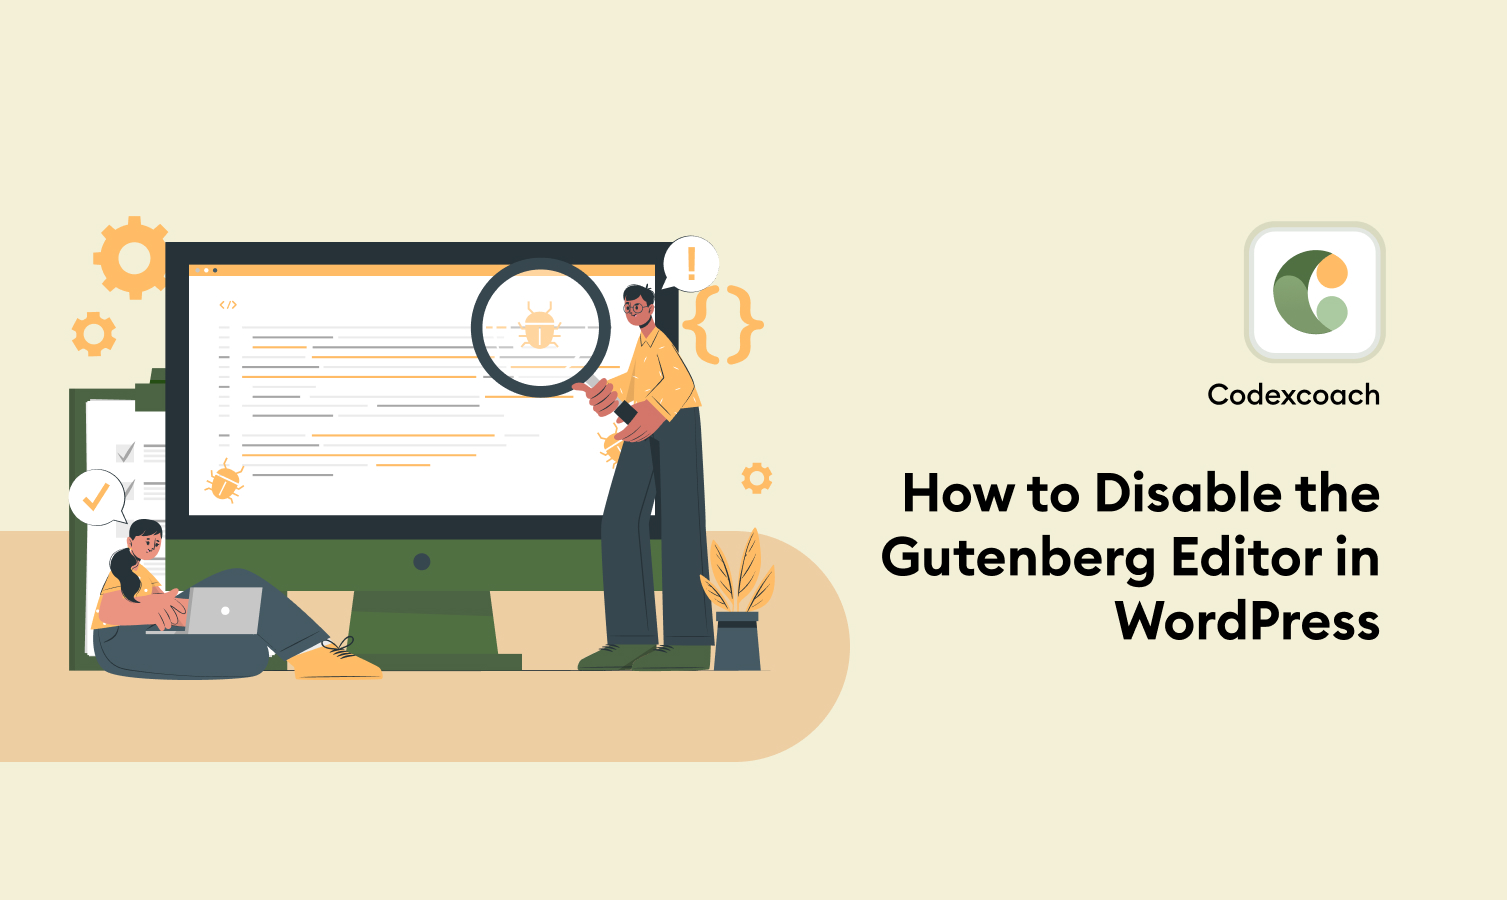 How to Disable the Gutenberg Editor in WordPress